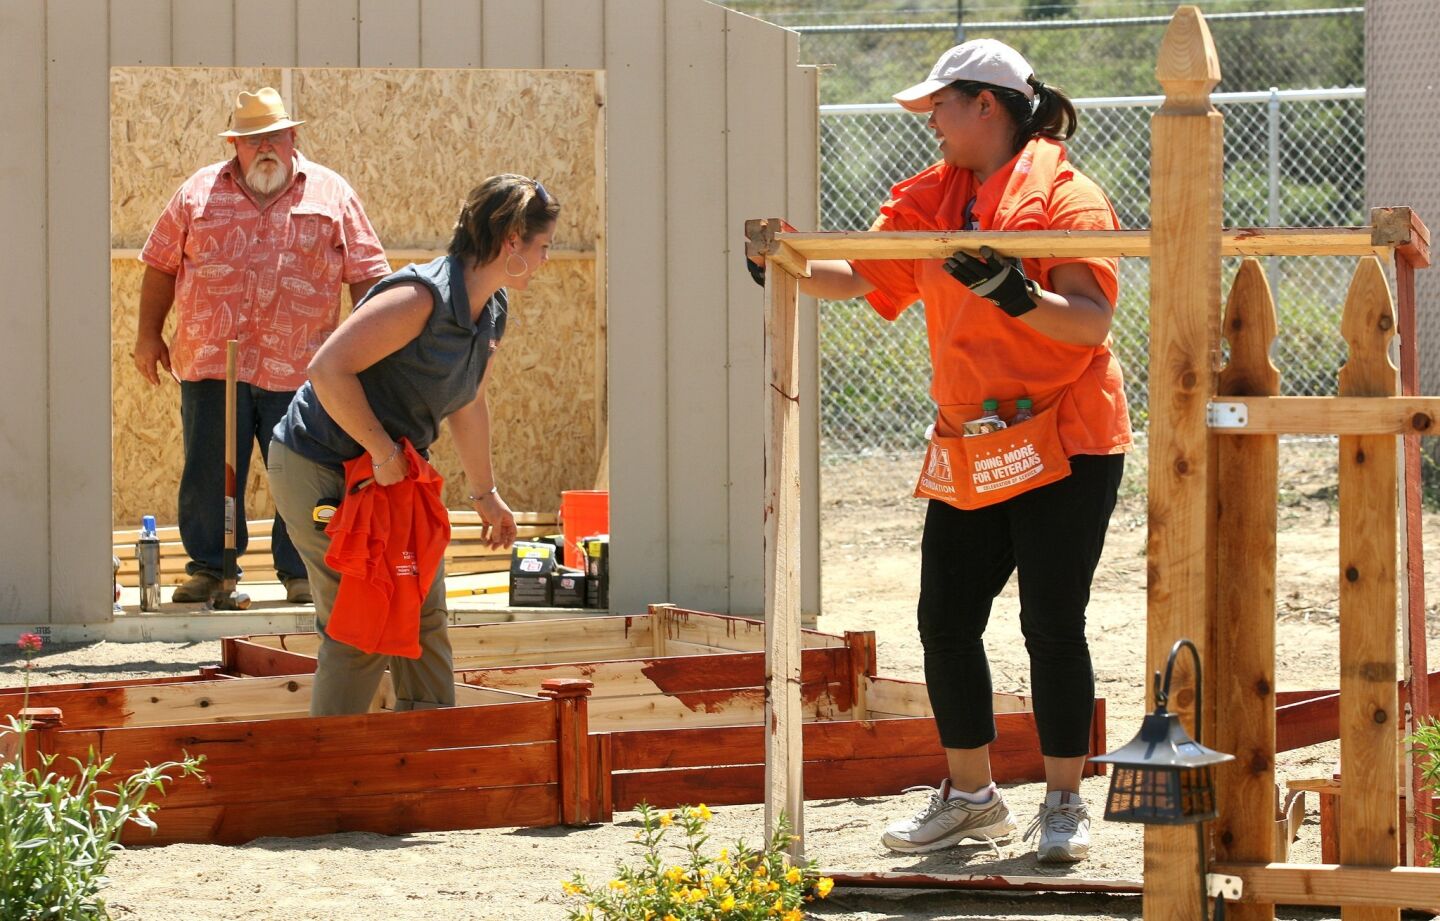 Home Depot volunteers Gary Crew, Emily Simpson and Christine Vincent help build the garden on an old U.S. Navy housing village in San Pedro that will become the nation's first permanent housing complex exclusively for female veterans.